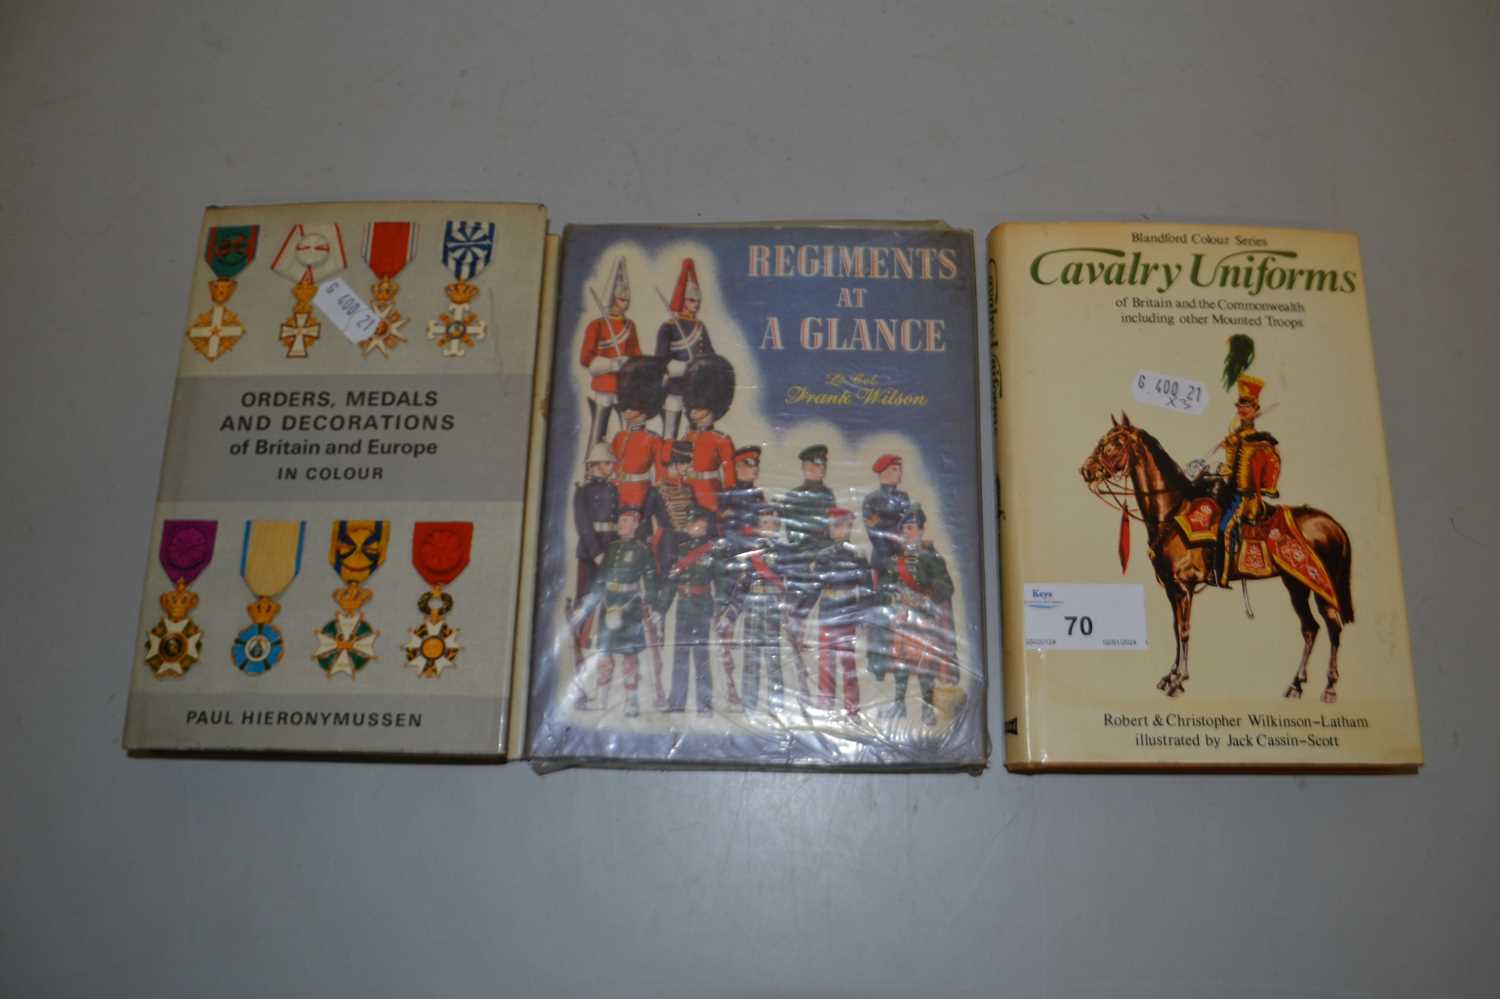 Books on military uniforms, regiments and orders and declarations